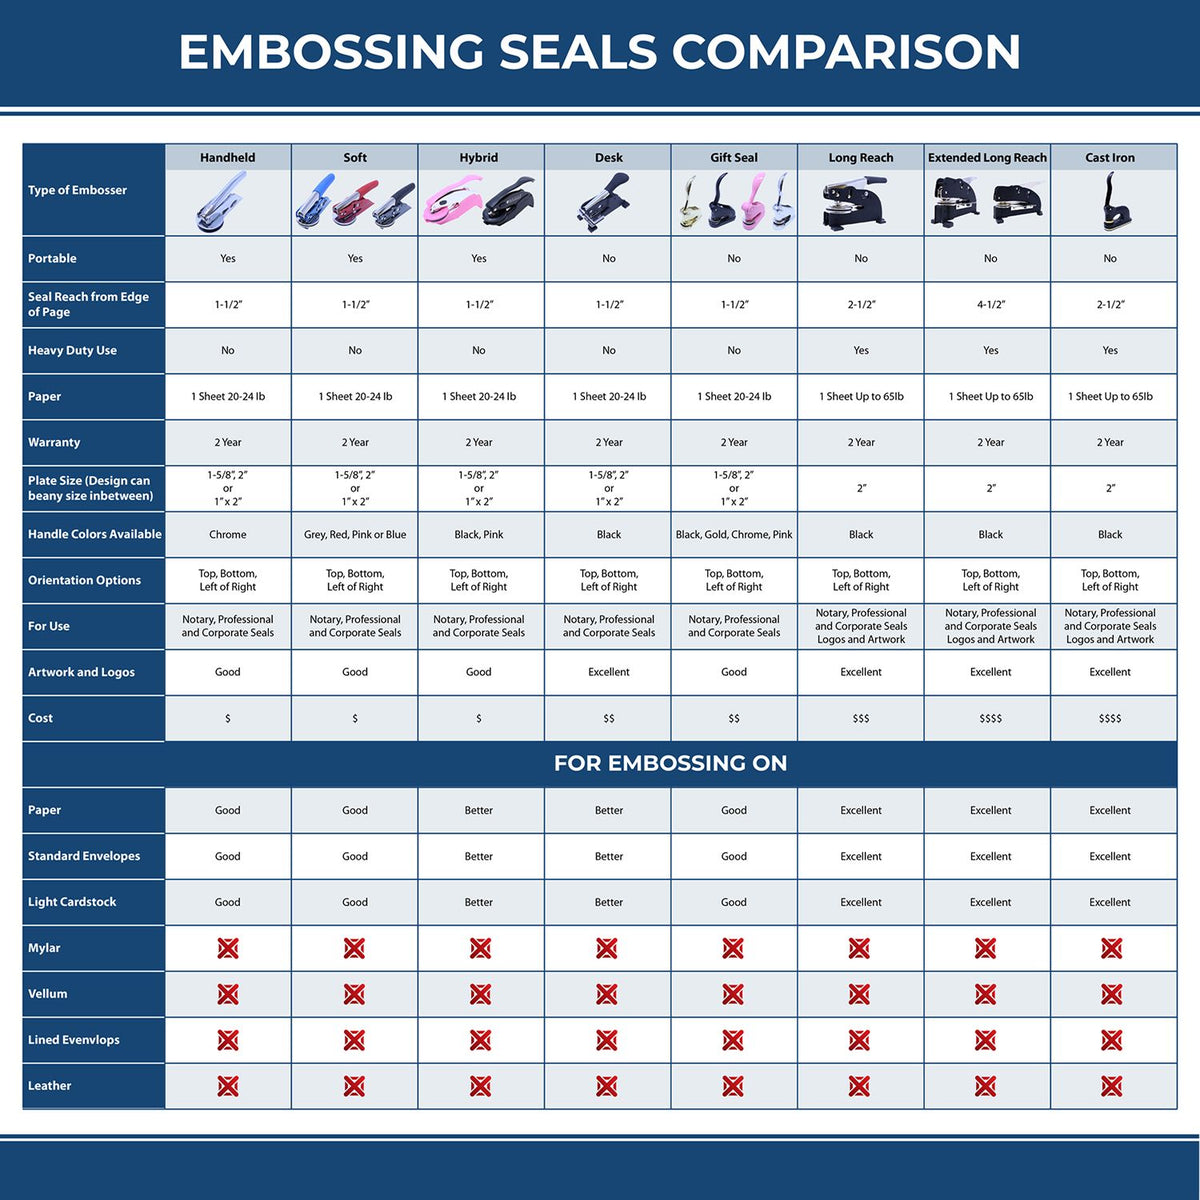 A comparison chart for the different types of mount models available for the Extended Long Reach Rhode Island Architect Seal Embosser.